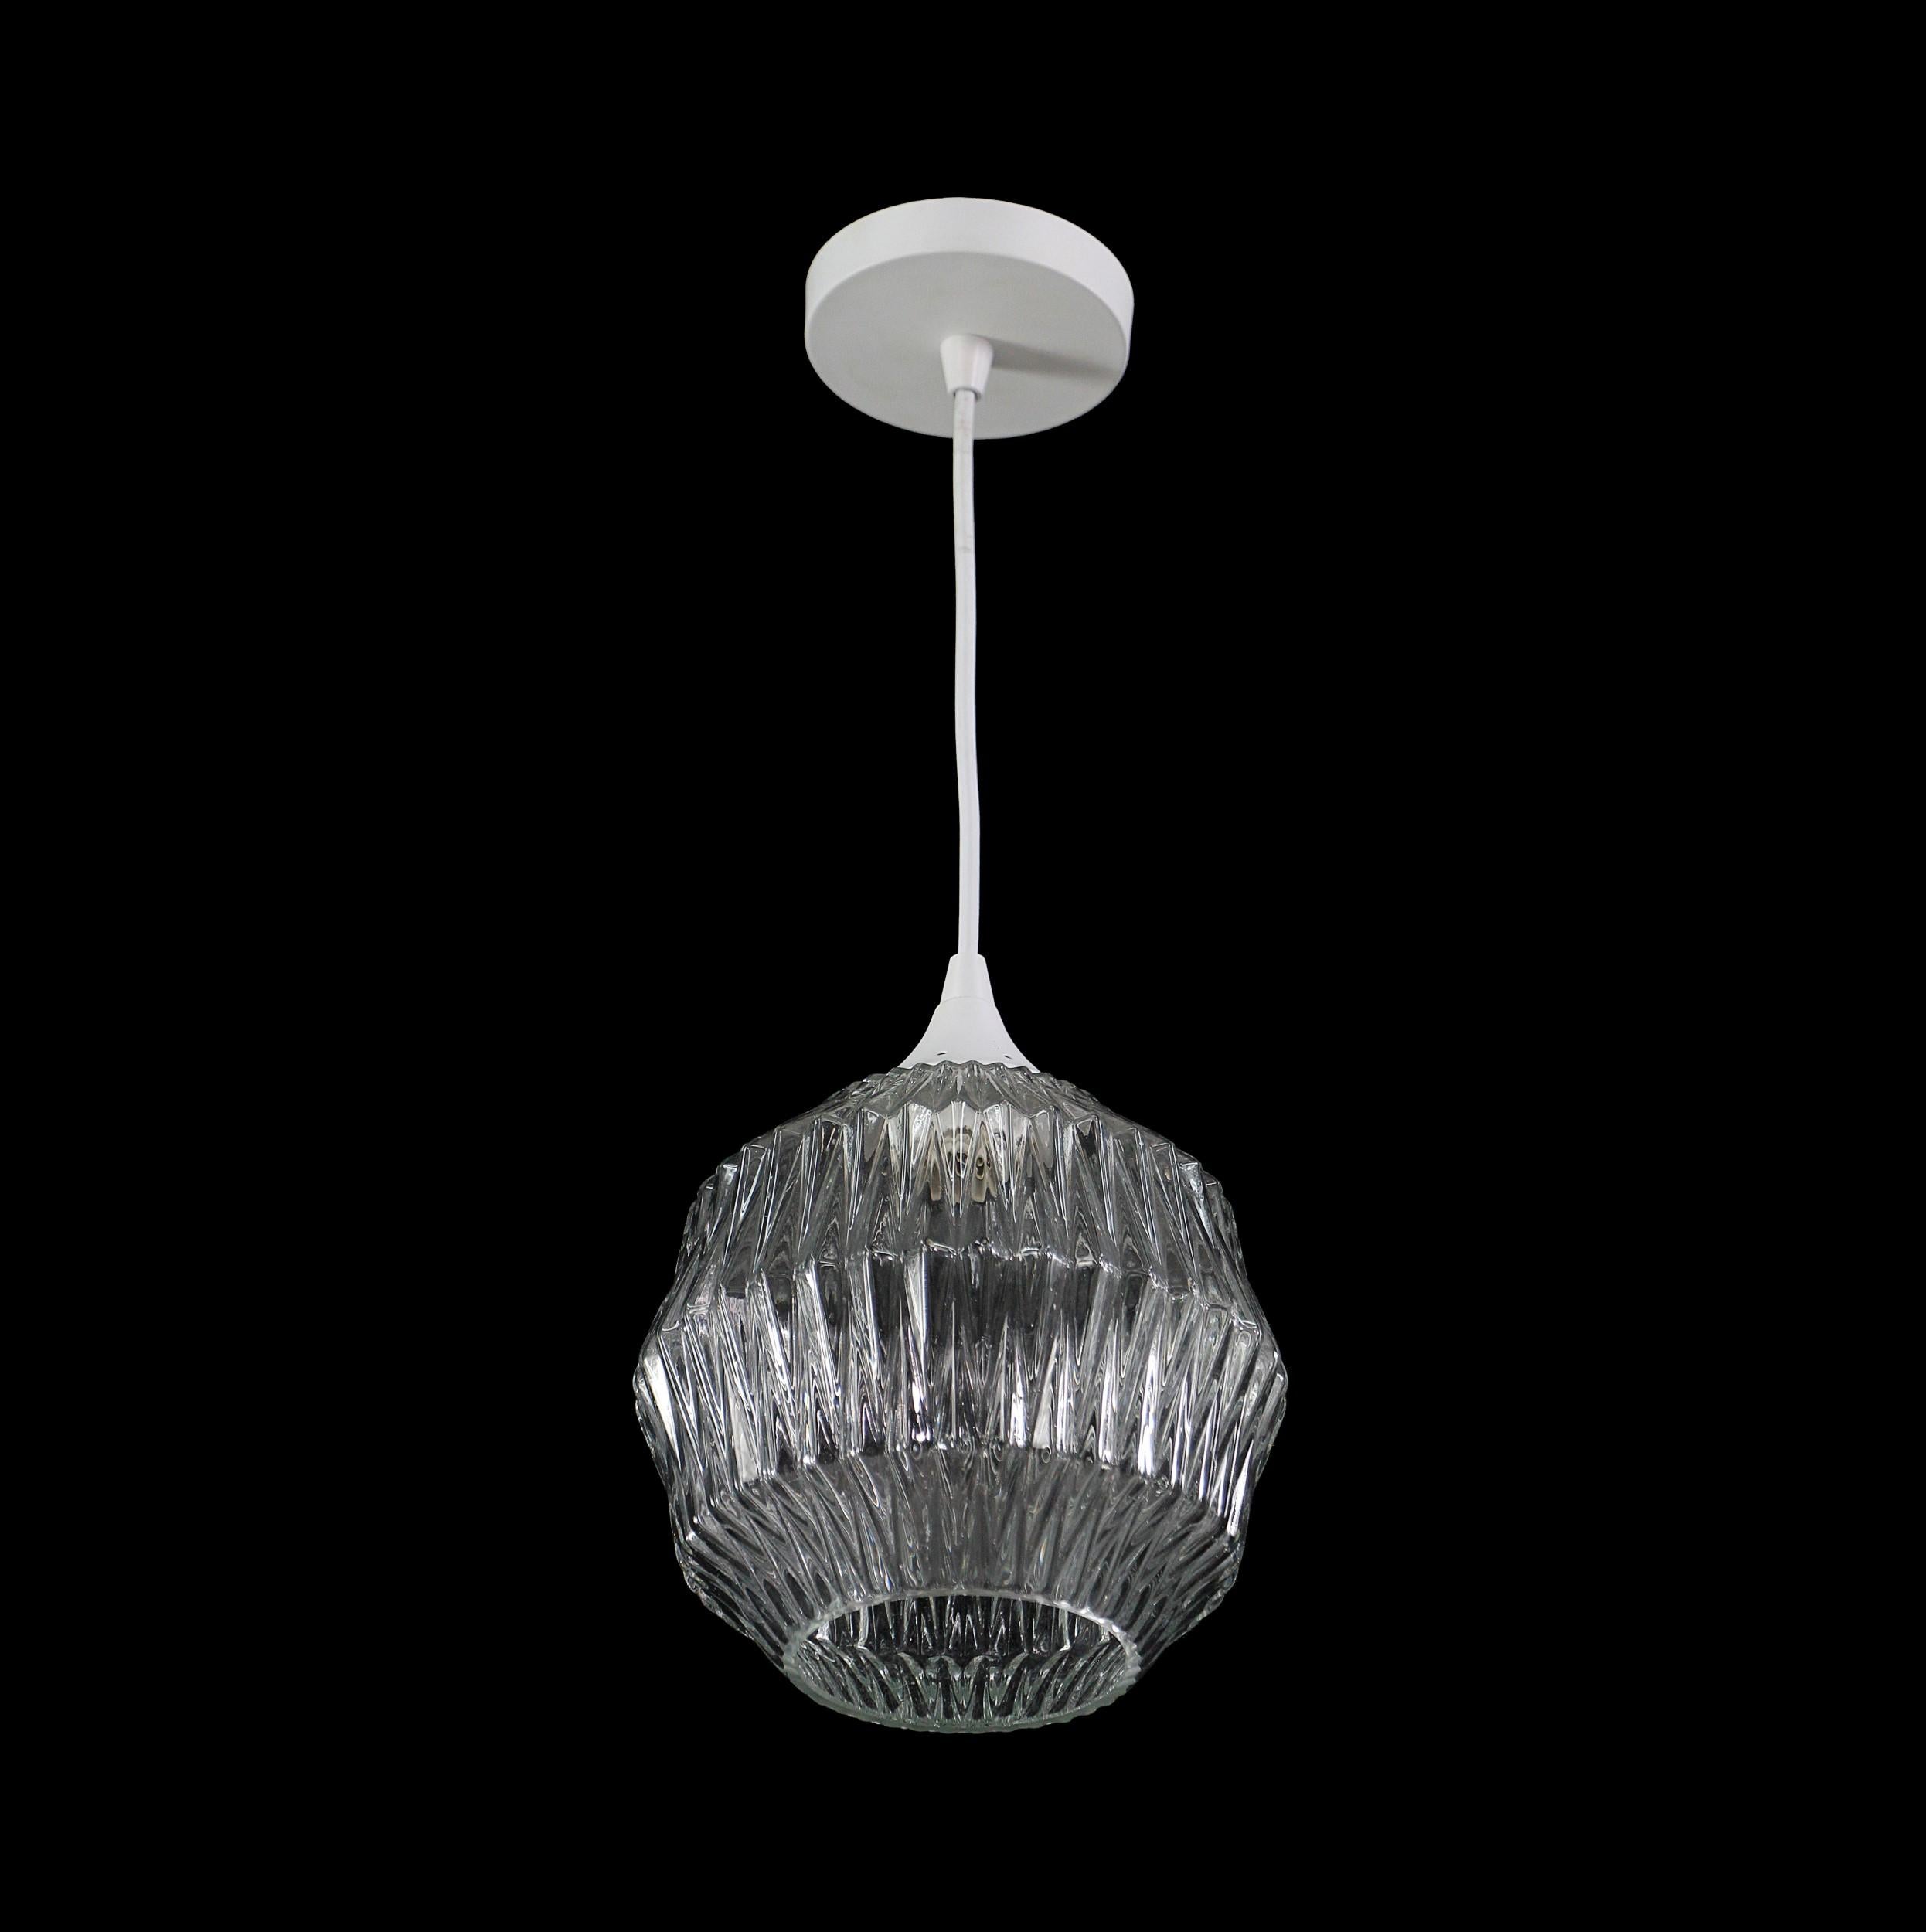 Mid-Century Modern Swedish pendant light with geometric molded glass shade with open bottom. This rare glass shade is fitted with a newly wired fitter featuring a white rod and canopy. Cleaned and rewired. Small quantity available at time of